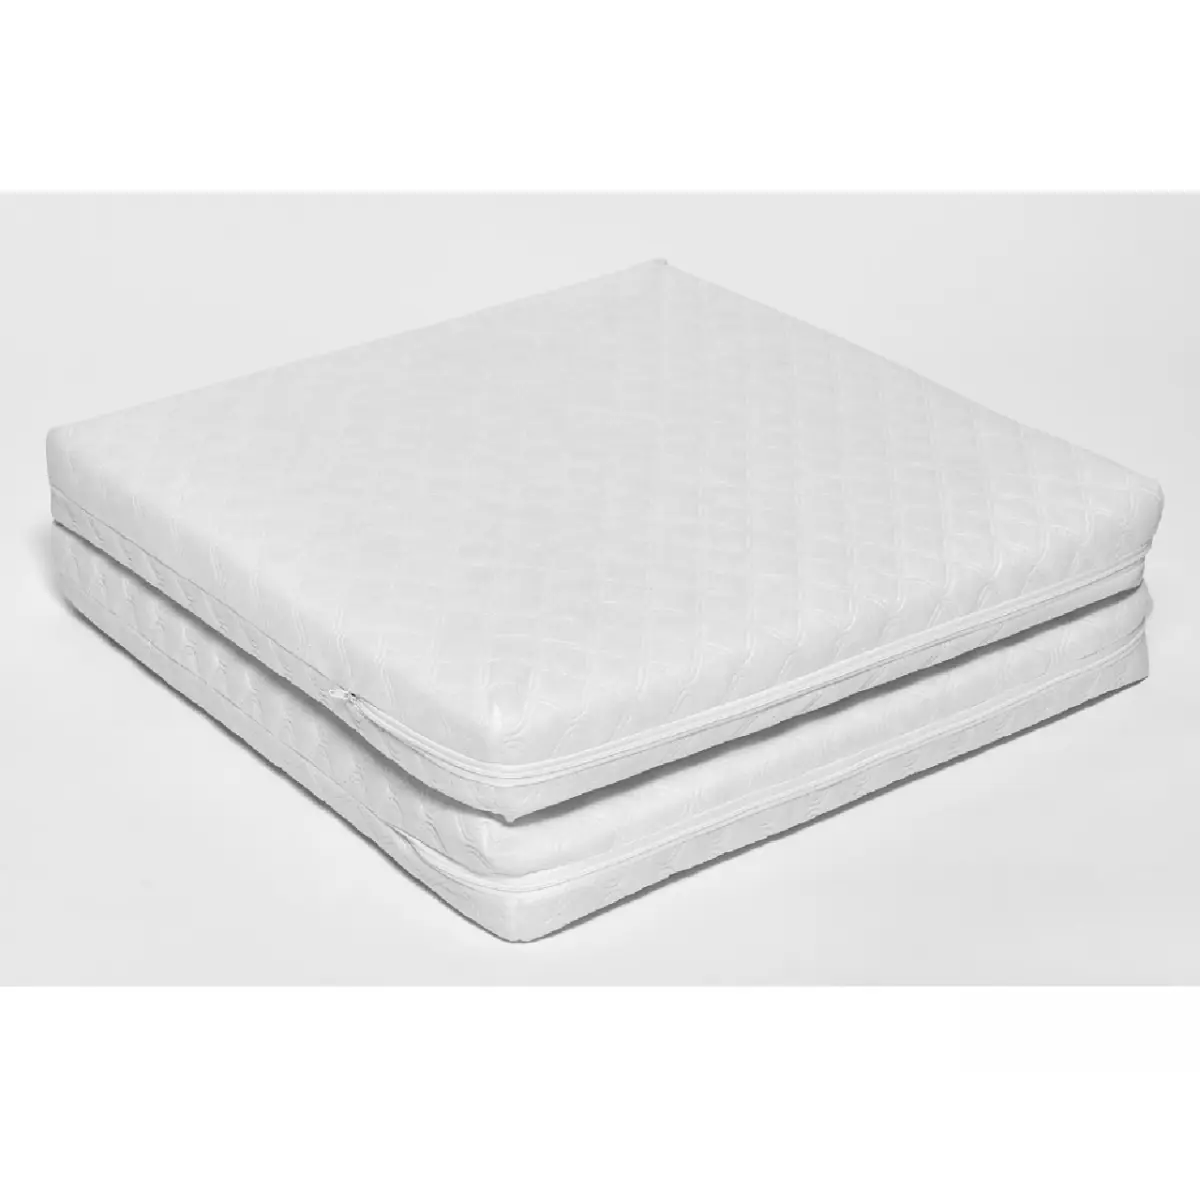 Image of Ventalux Non Allergenic Fibre/quilt Covered Folding Travel Cot Mattress-White (95x65)